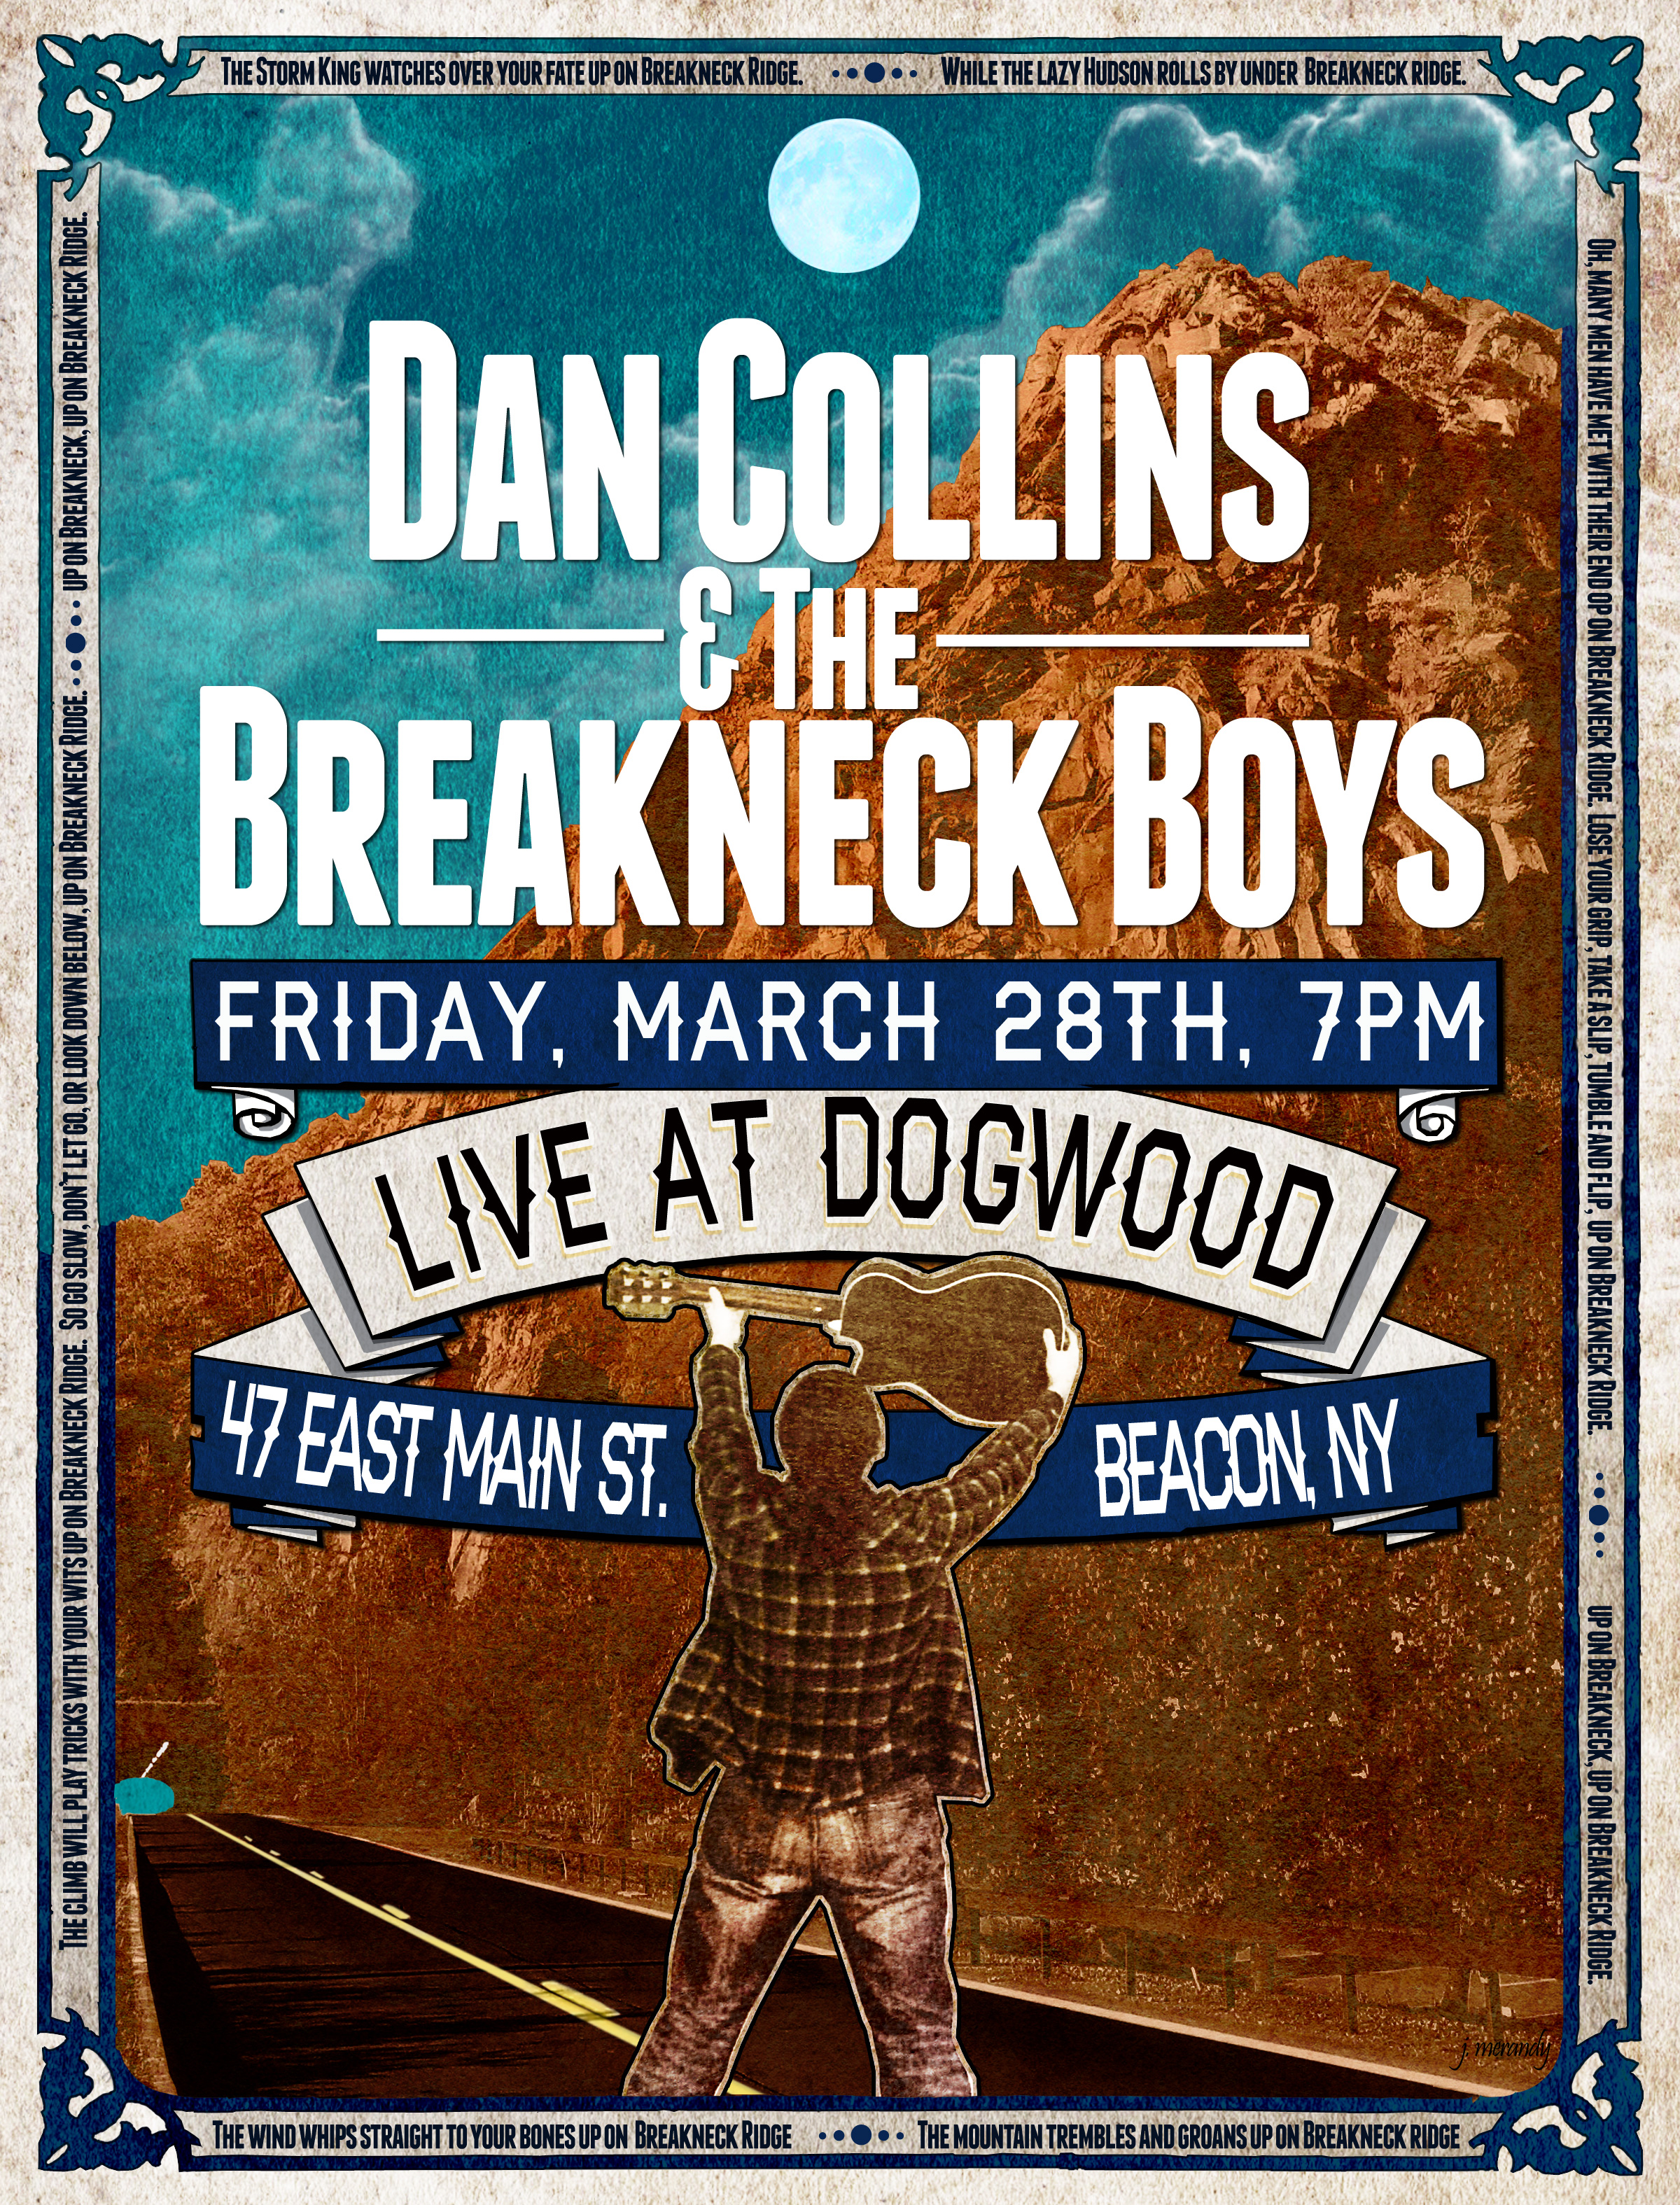 Dan Collins and The Breakneck Boys